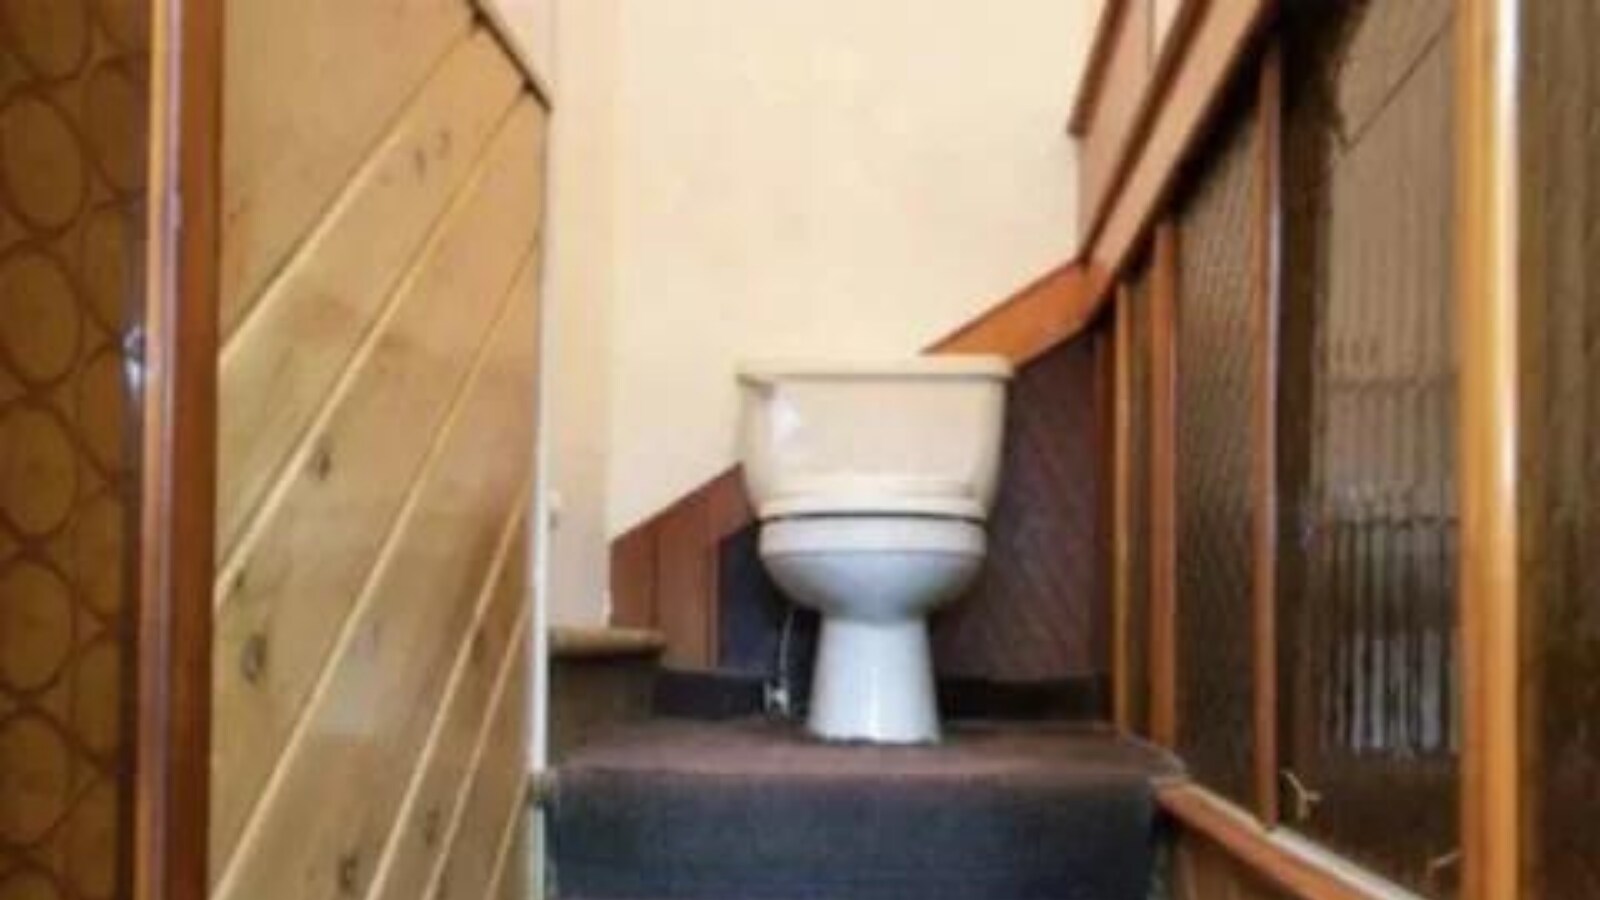  Pennsylvania House With Toilet on Carpeted Staircase is Now Viral 